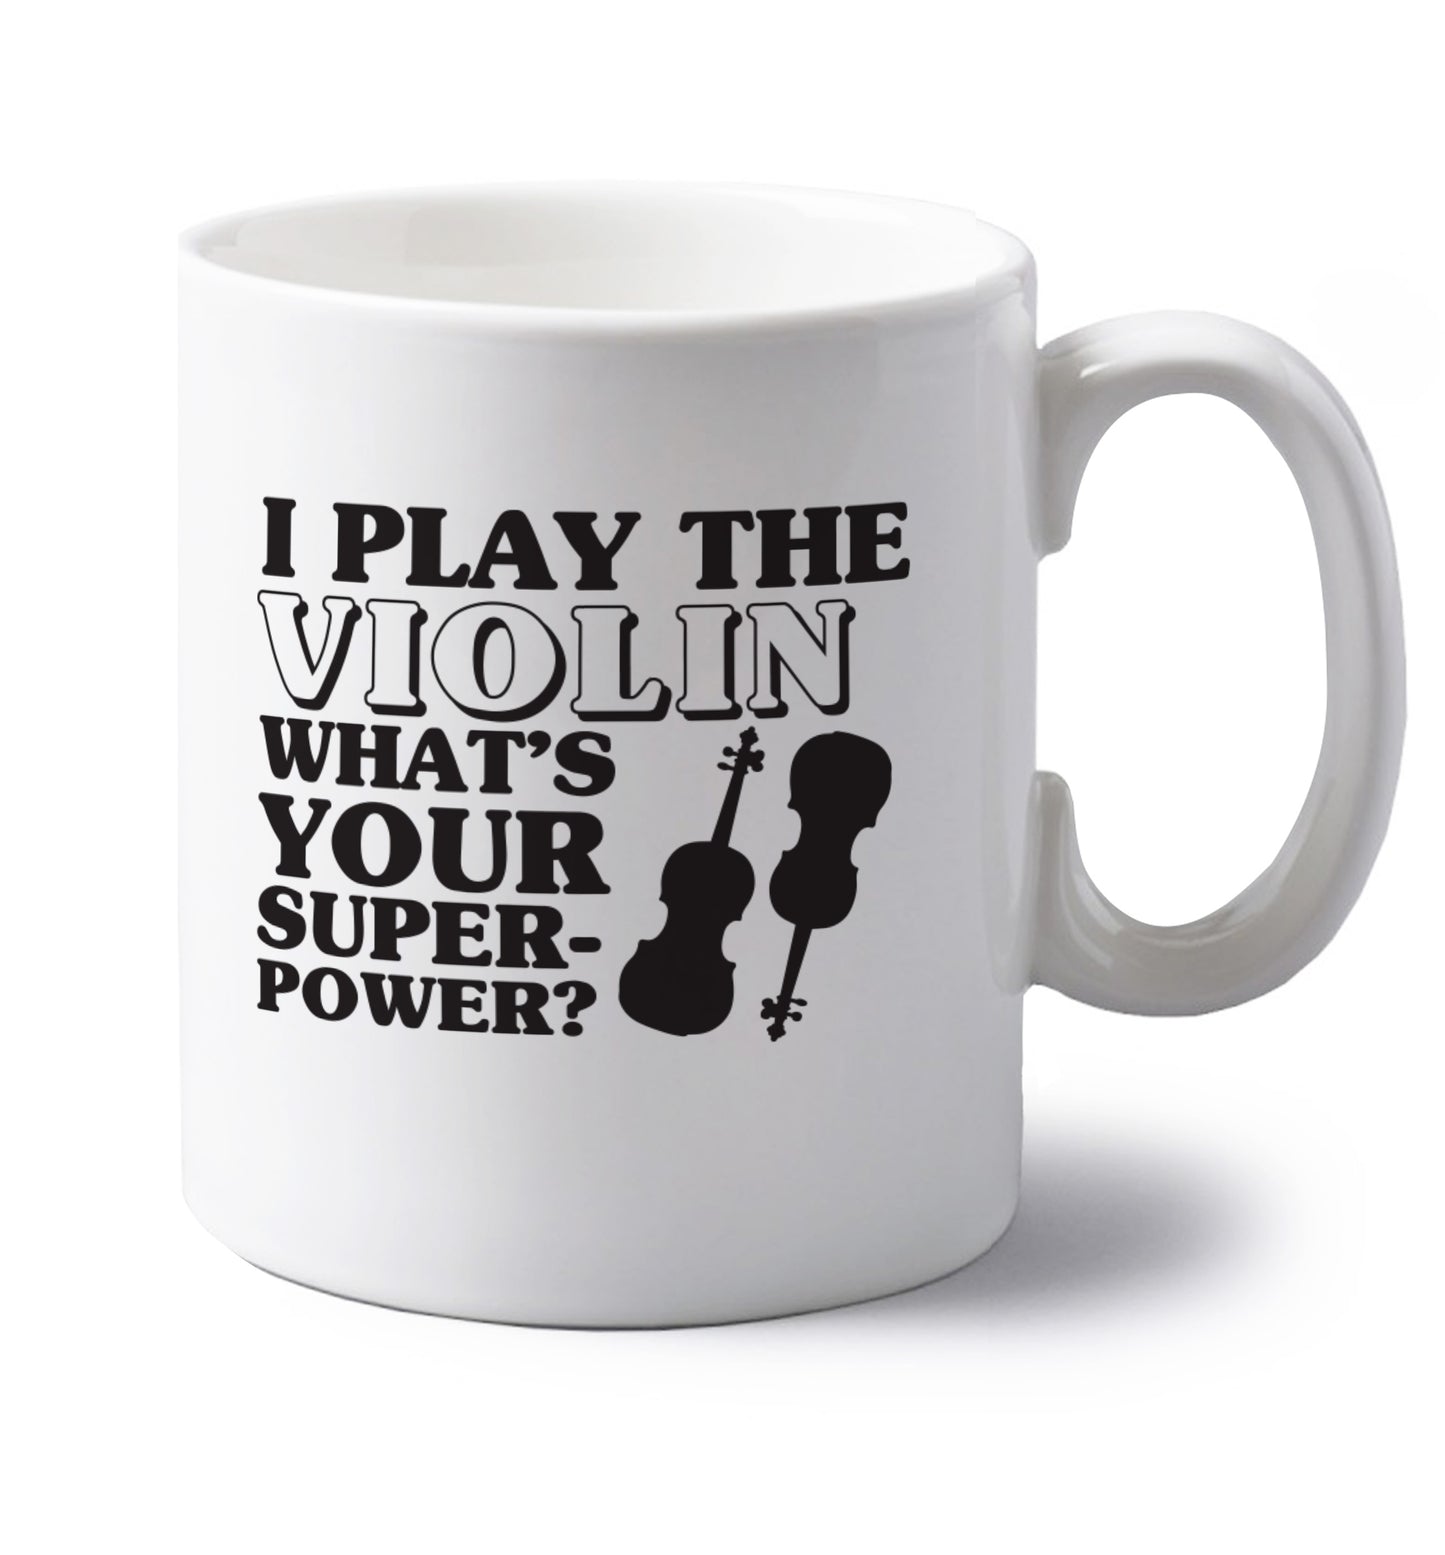 I Play Violin What's Your Superpower? left handed white ceramic mug 